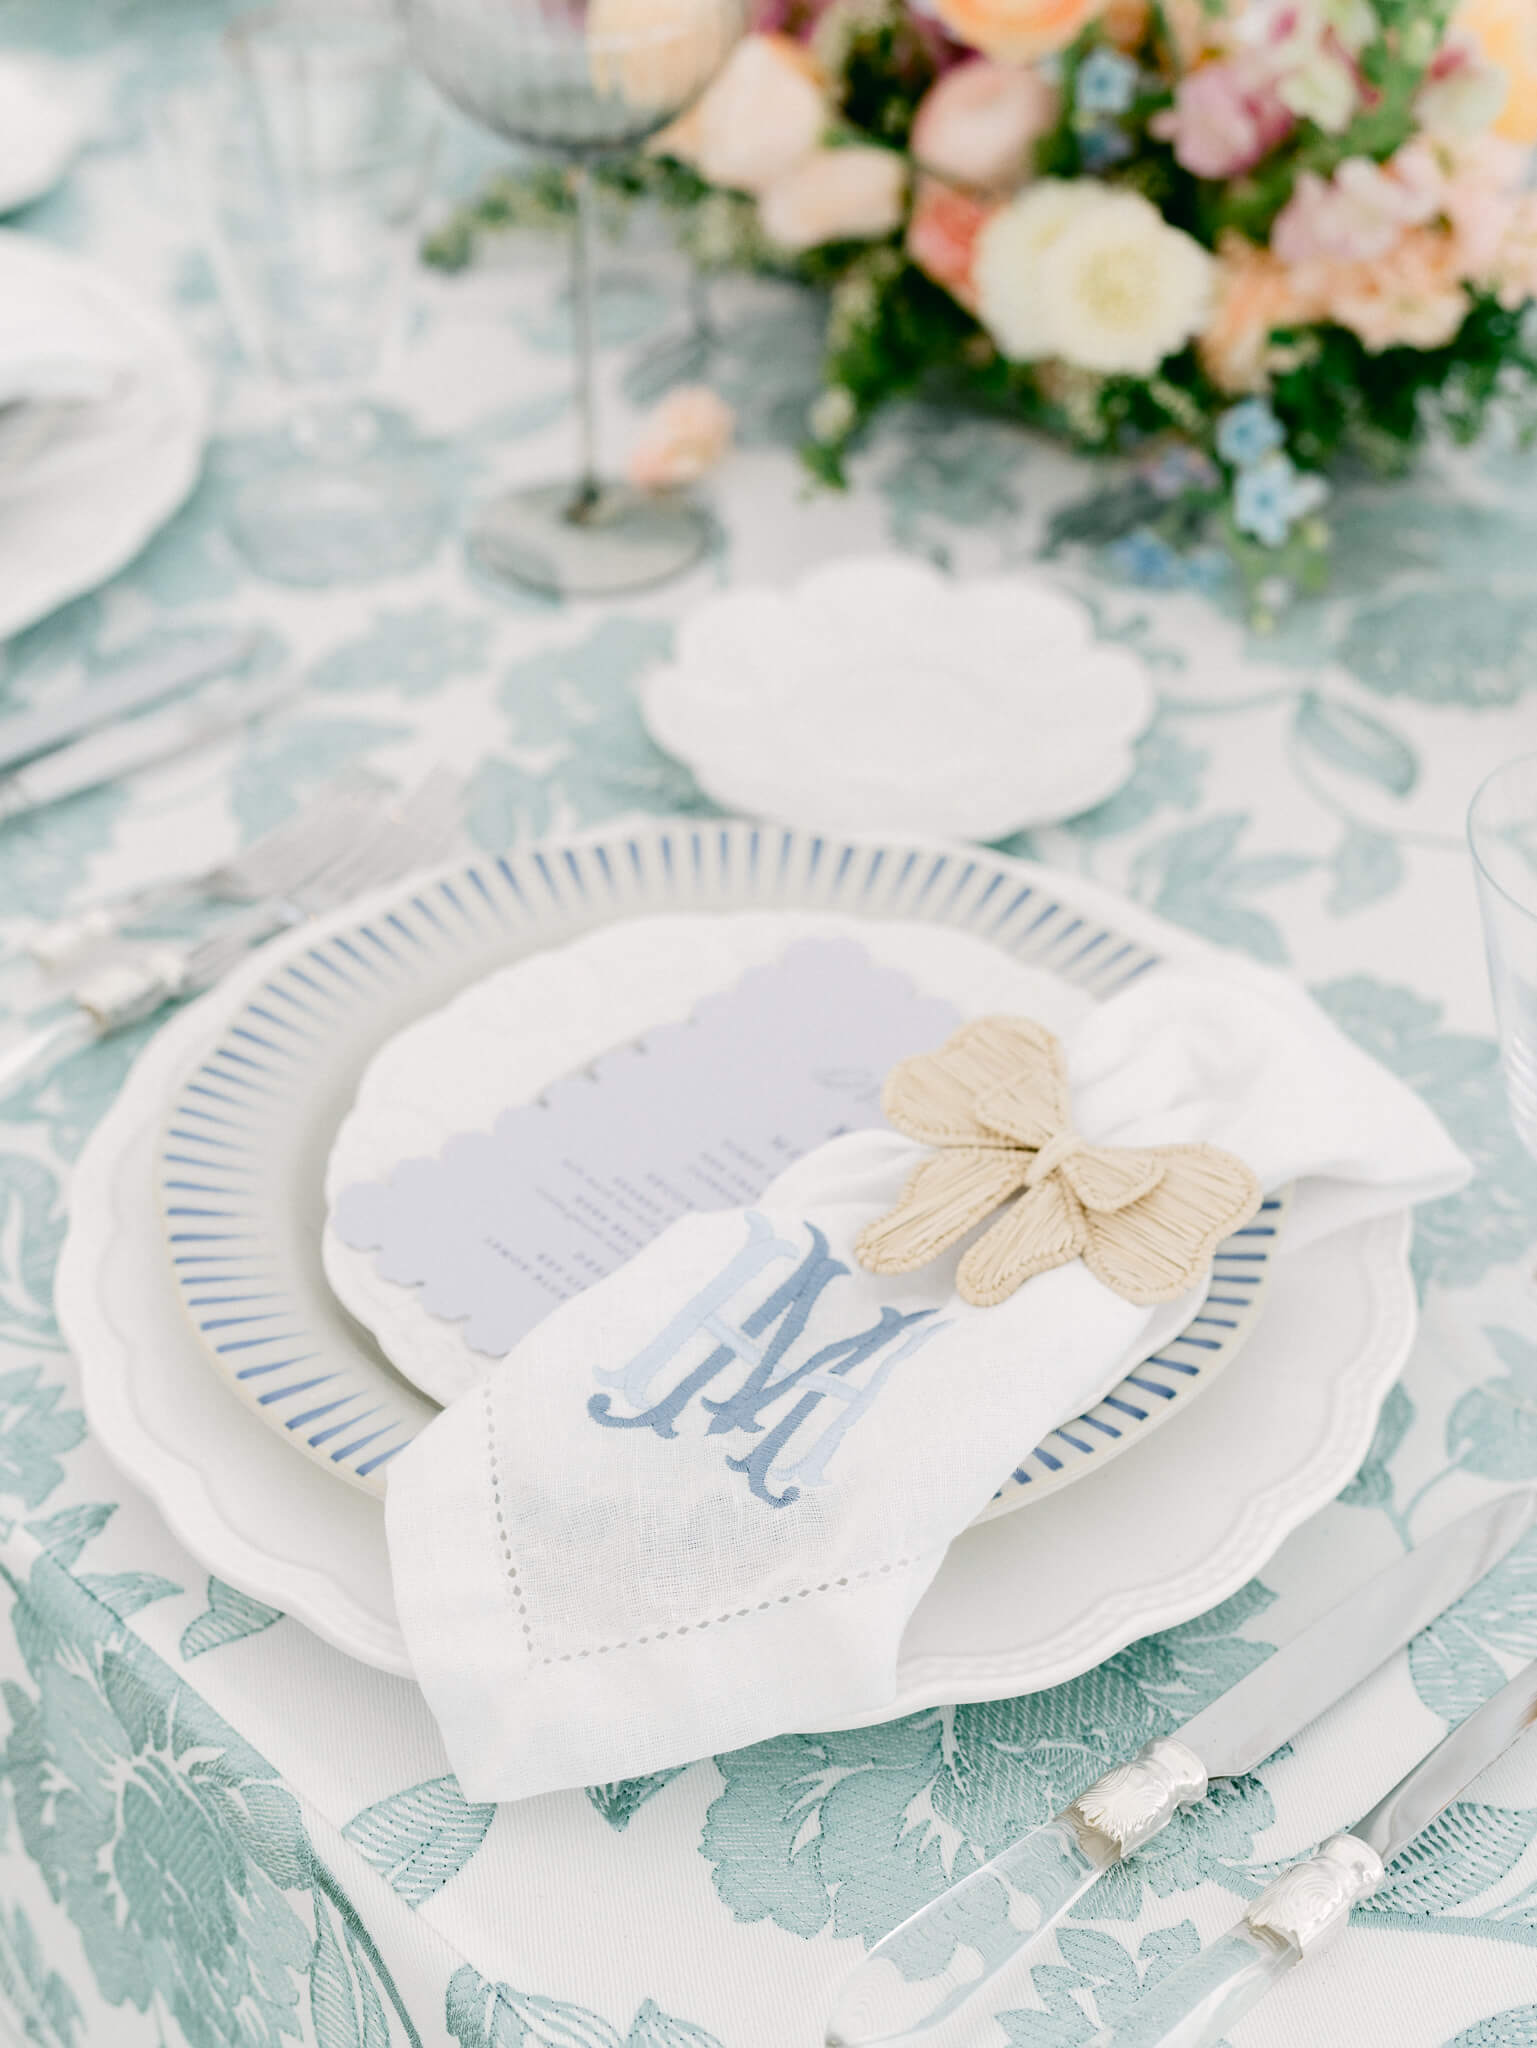 Closeup of a place setting with white and blue plates on a floral blue and white table cloth.